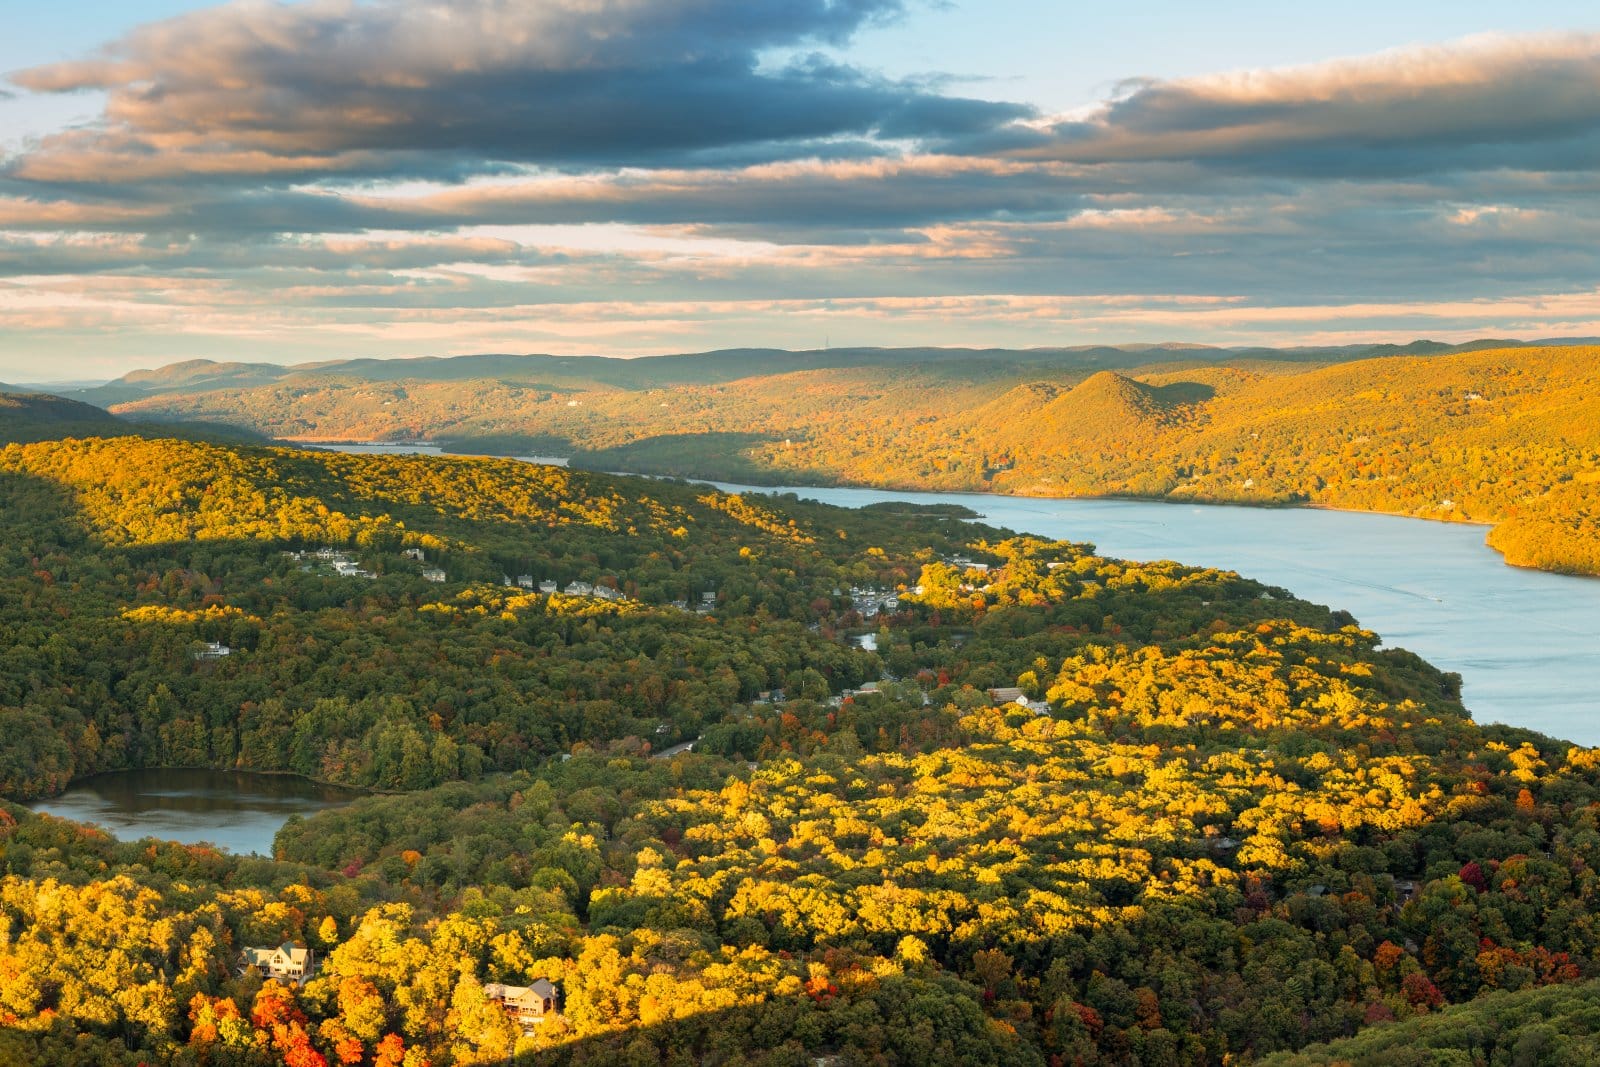 <p class="wp-caption-text">Image Credit: Shutterstock / Mihai_Andritoiu</p>  <p><span>As one of America’s oldest wine-making and grape-growing regions, Hudson Valley offers scenic beauty and wines that range from classic varietals to fruit wines.</span></p>